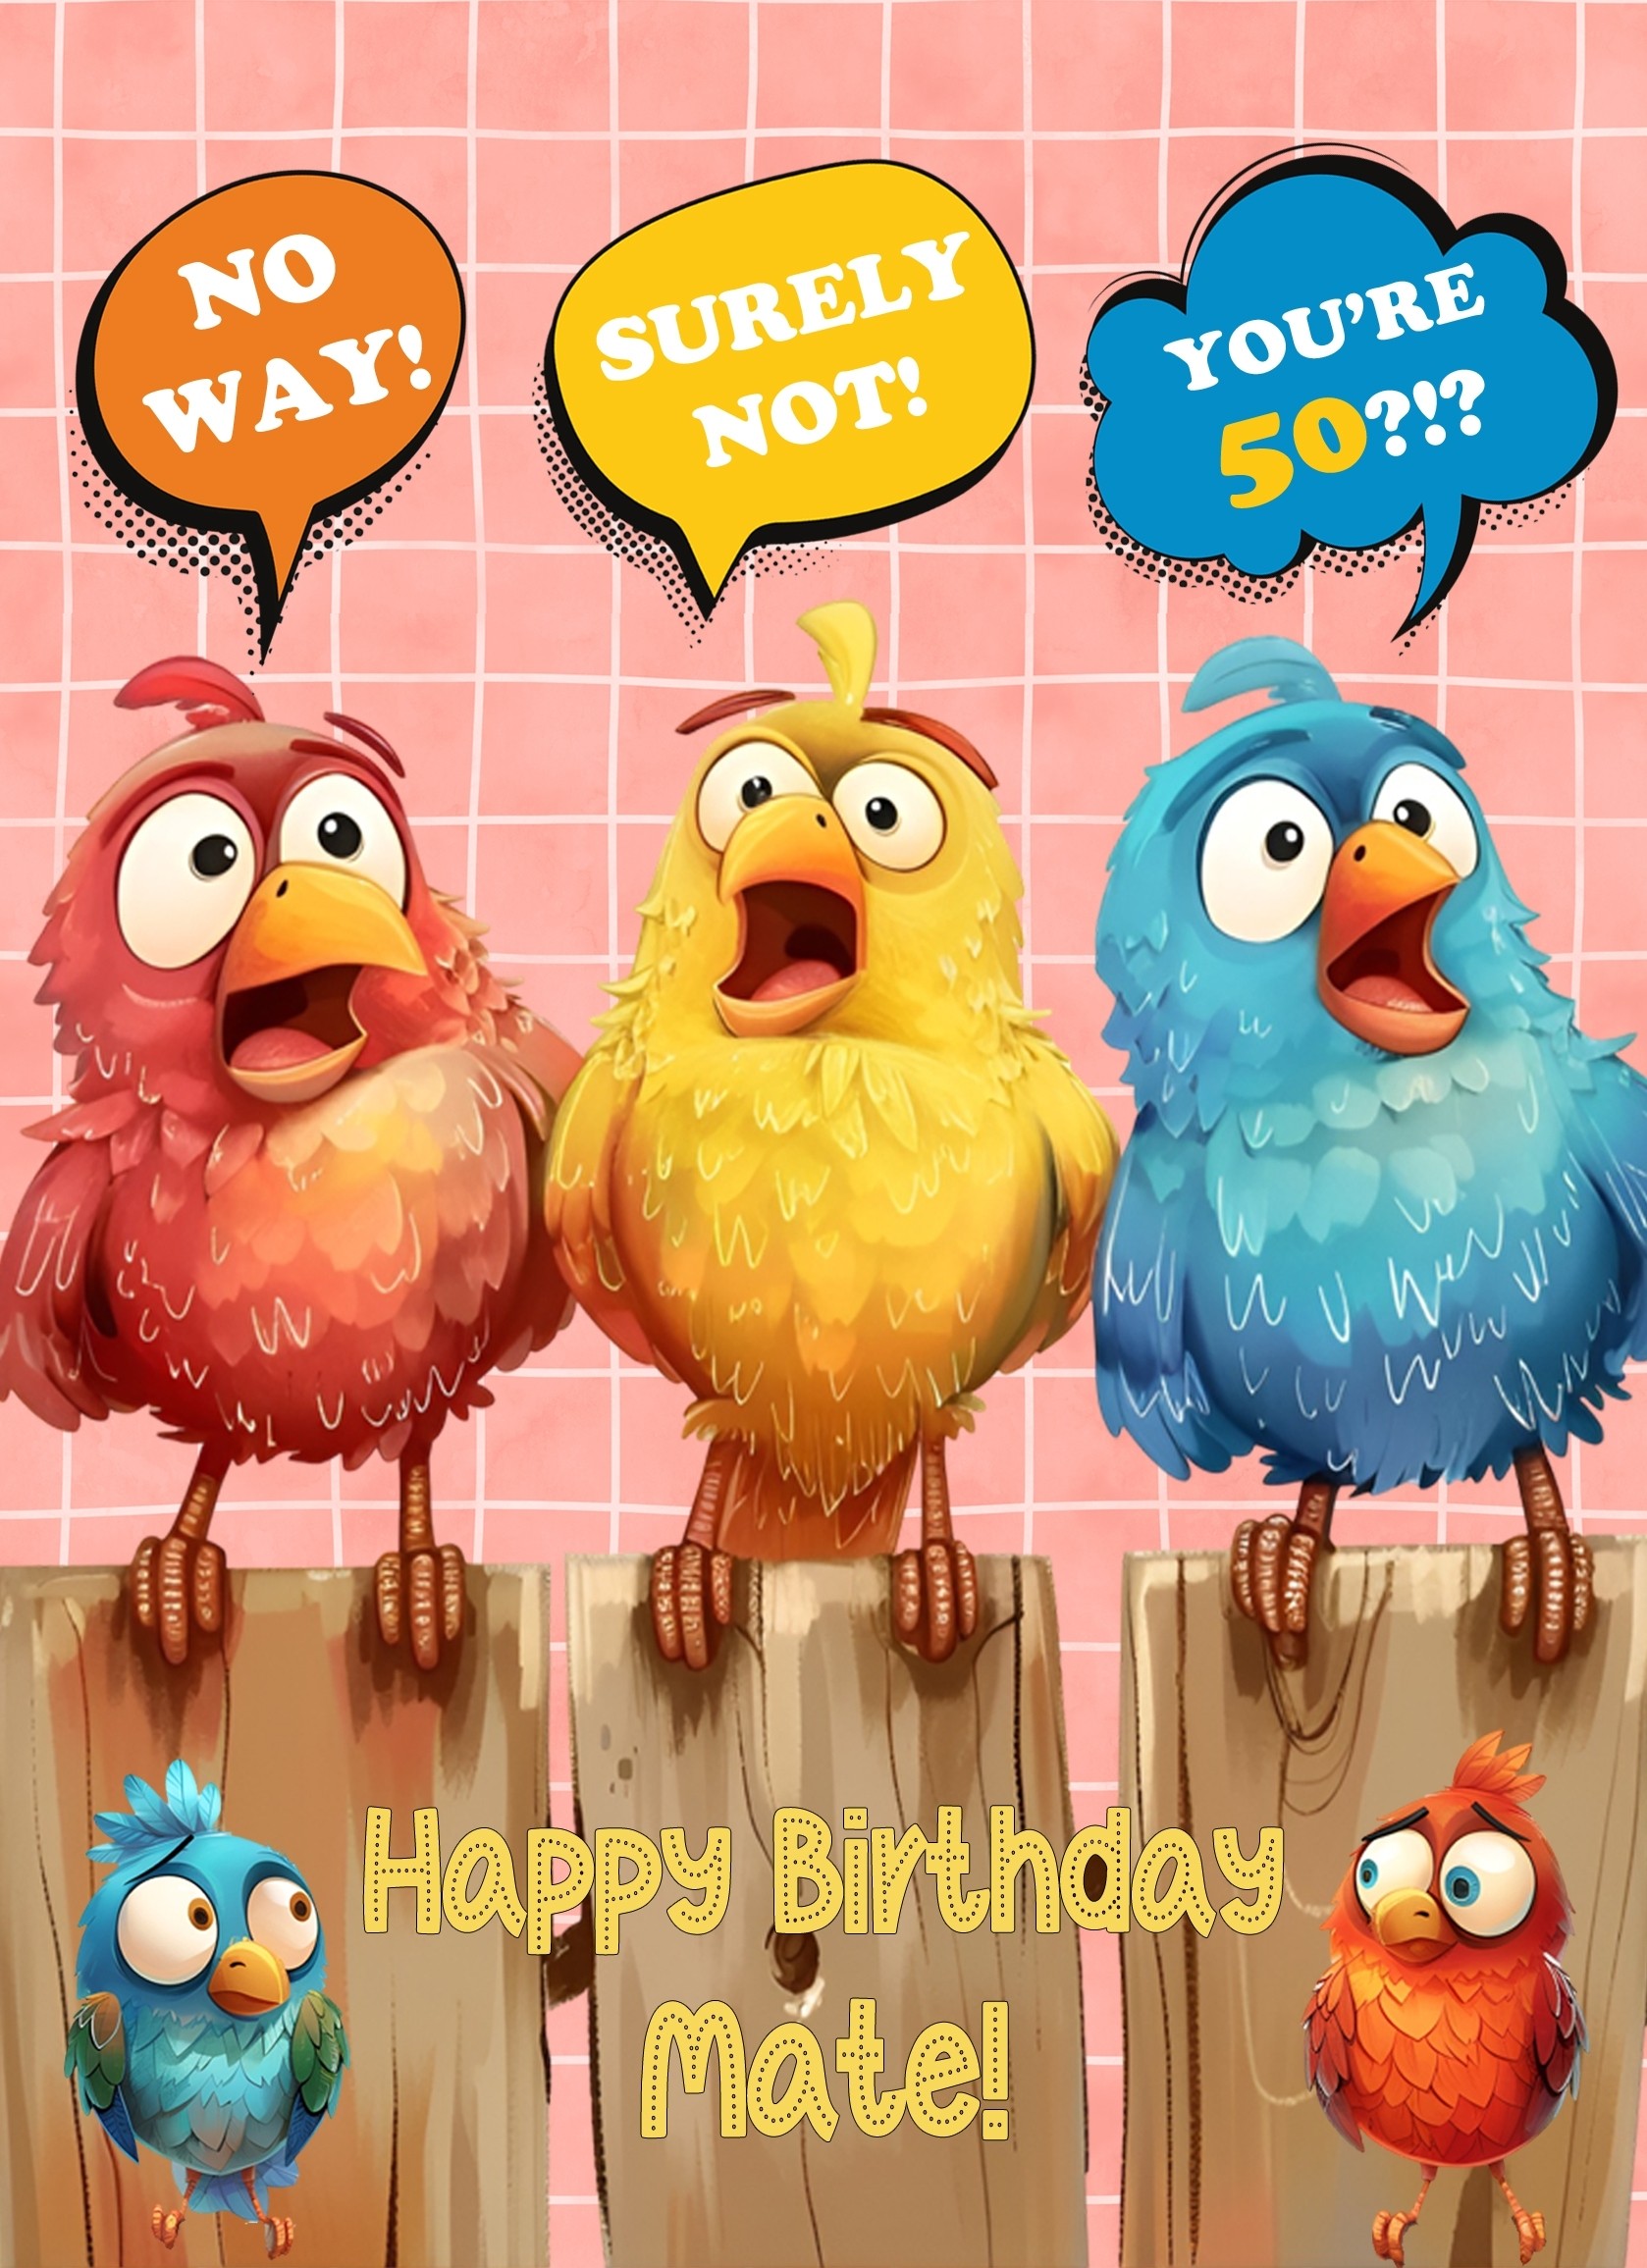 Mate 50th Birthday Card (Funny Birds Surprised)